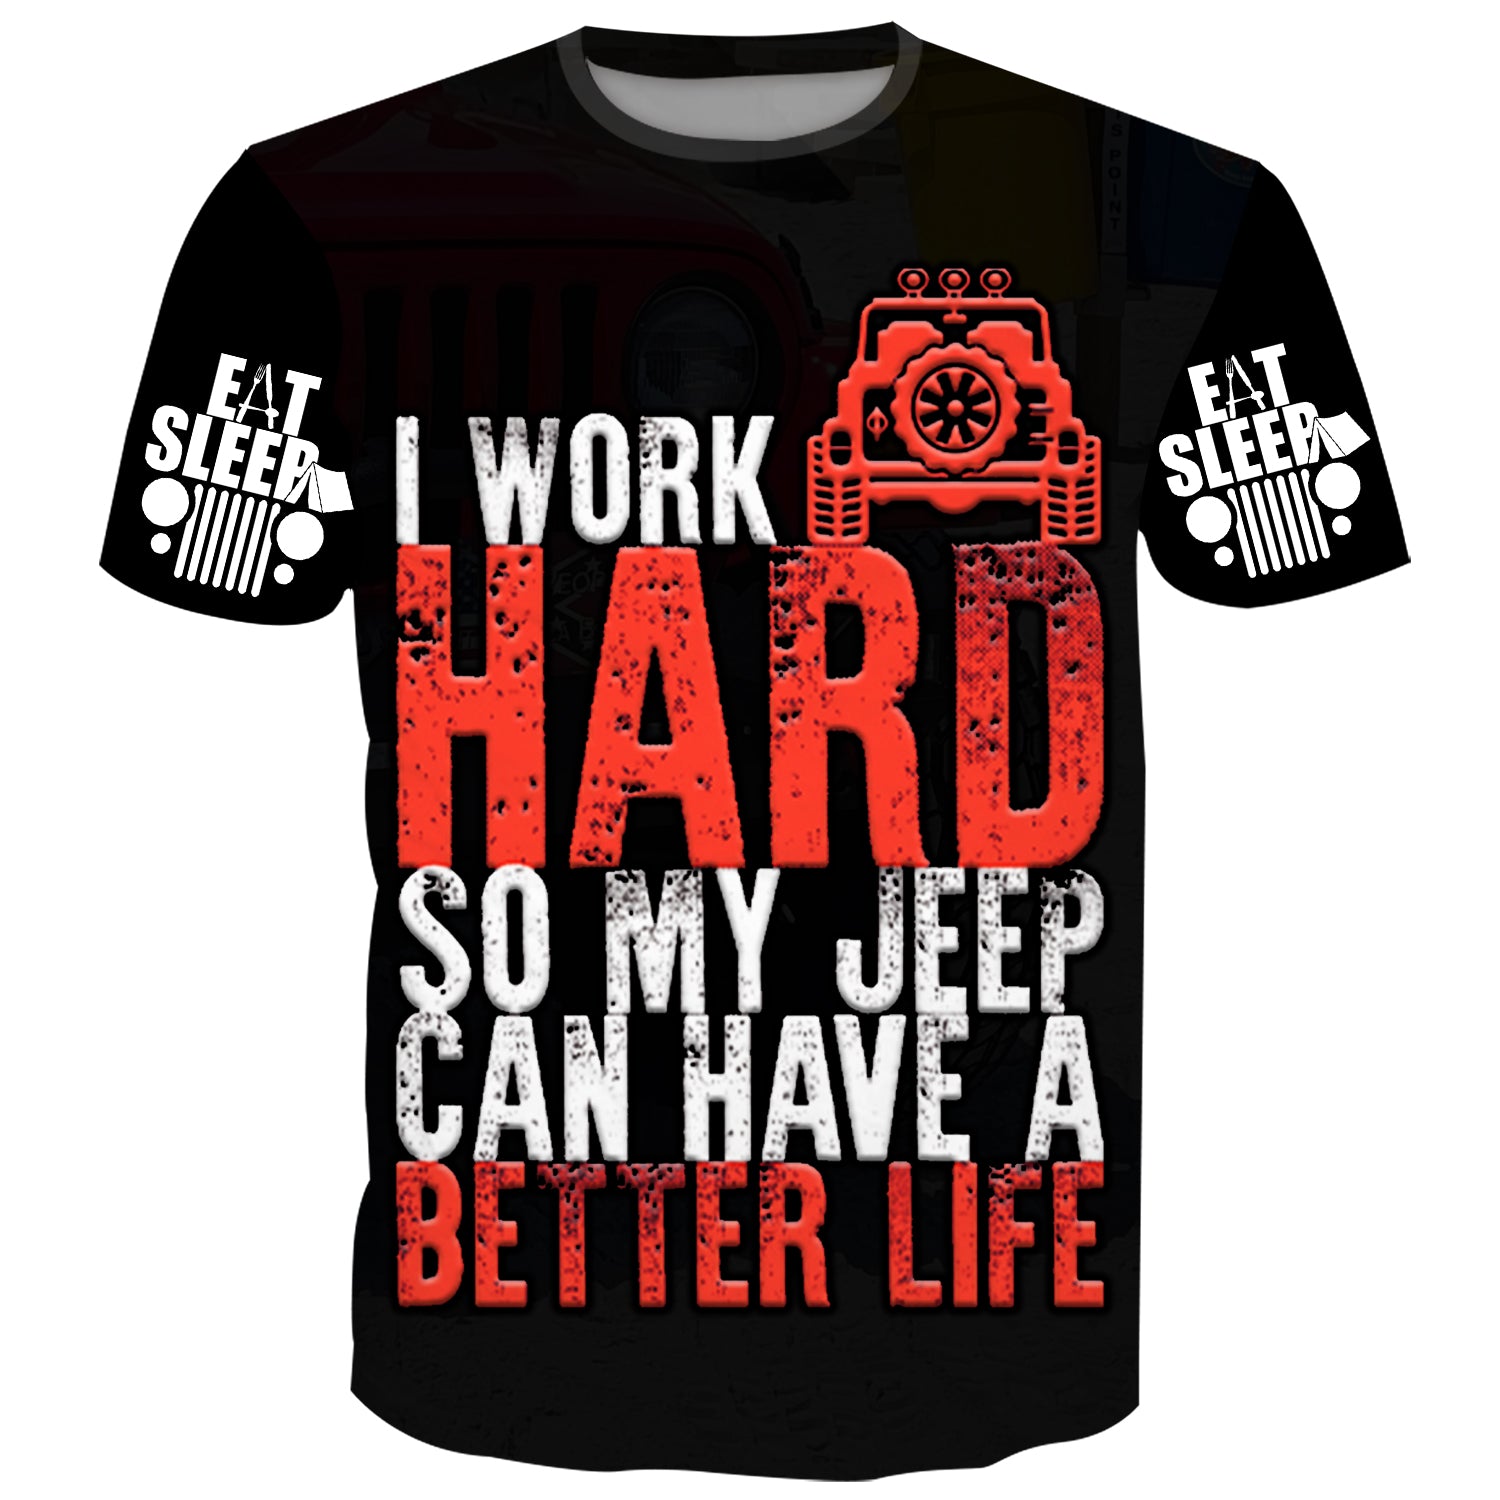 I work hard so my Jeep can have better life - T-Shirt